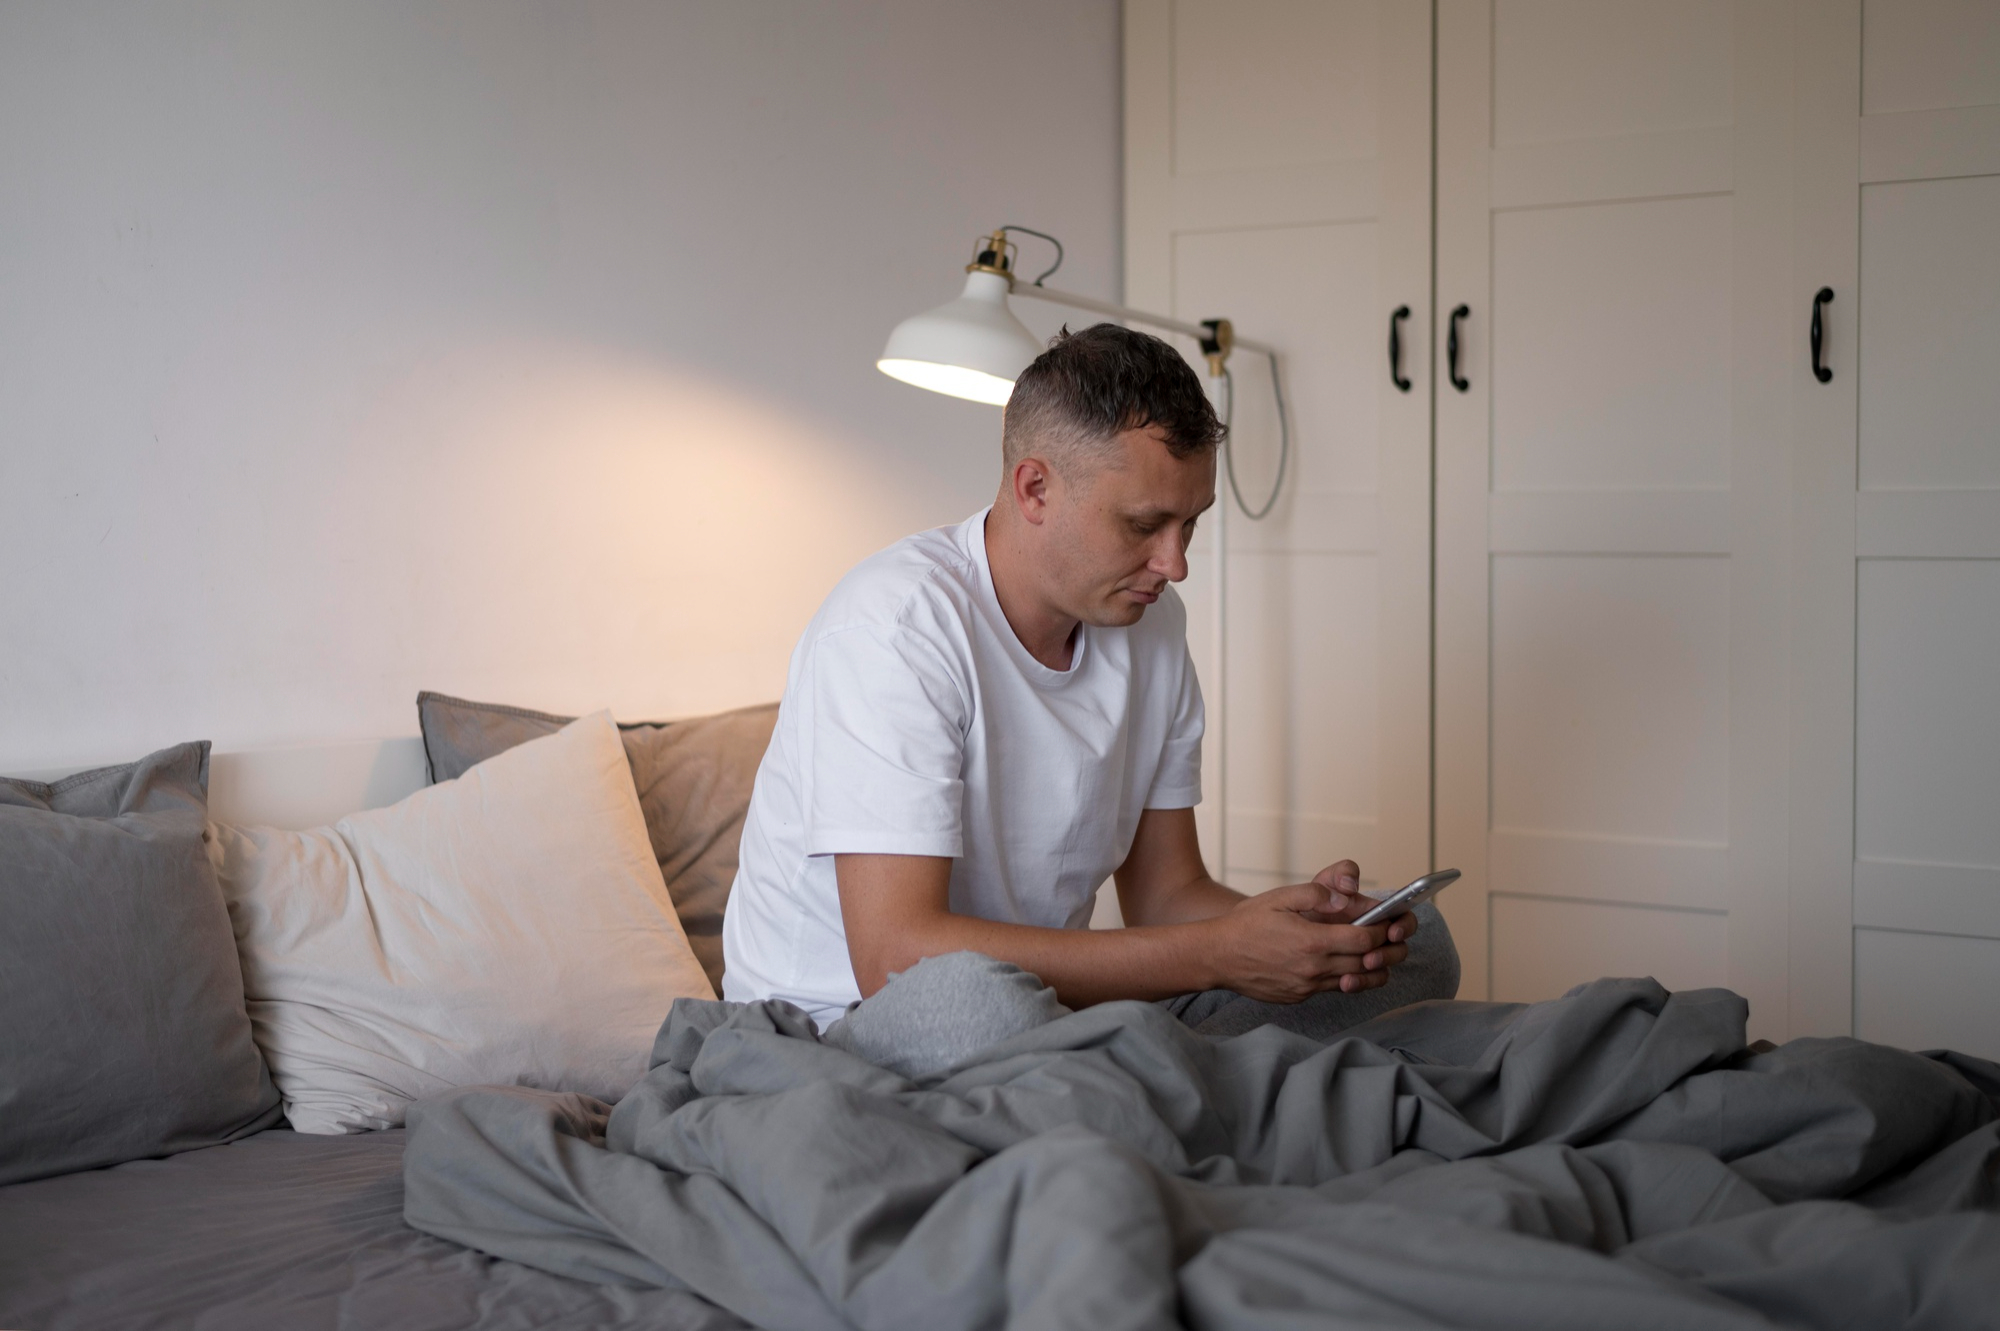 A man looking at a phone while covered in a sheet in bed | Source: Freepik